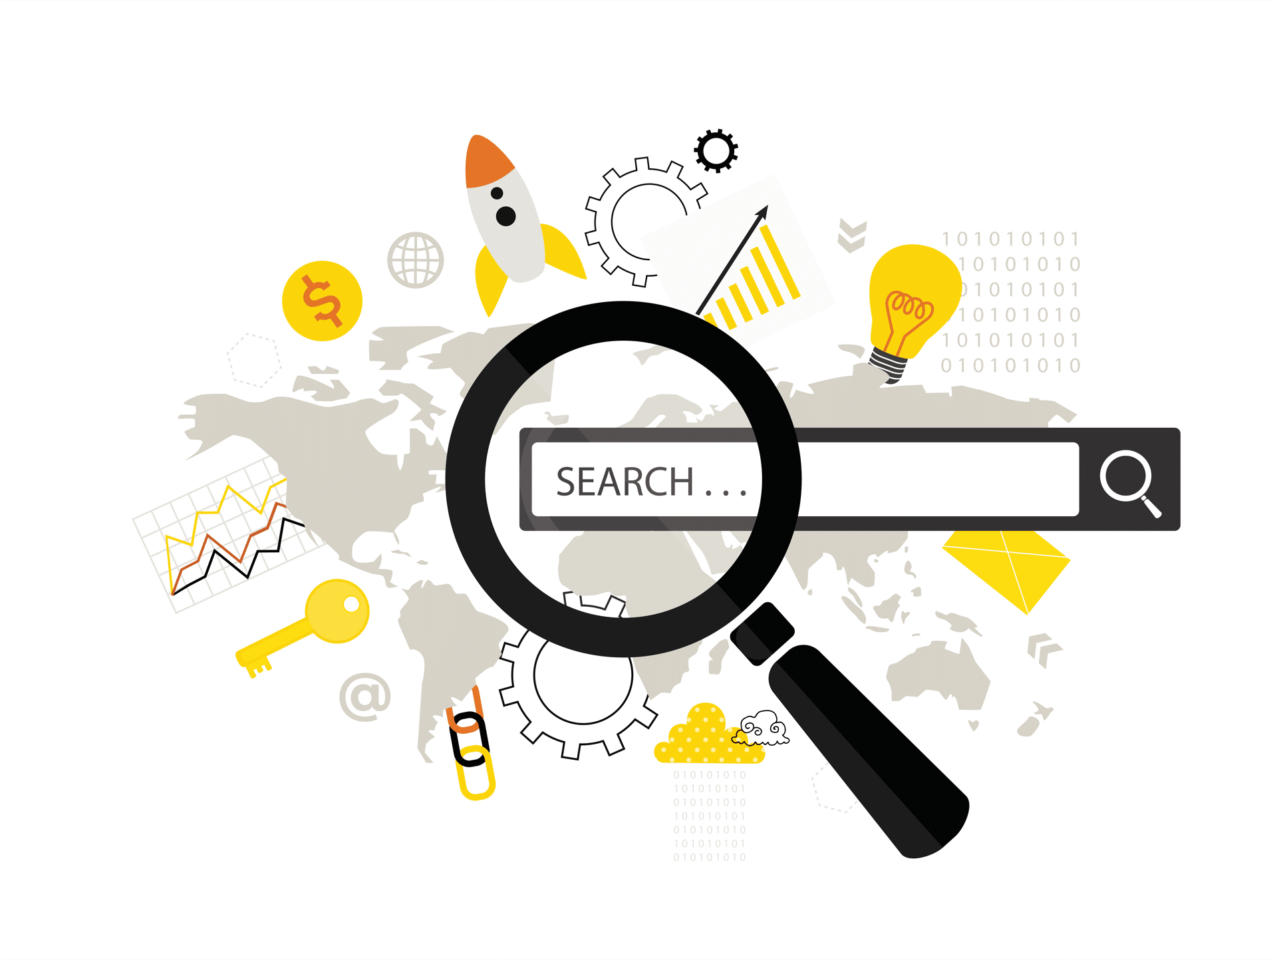 Map, graph, rocket, key, light bulb, search bar and magnifying glass